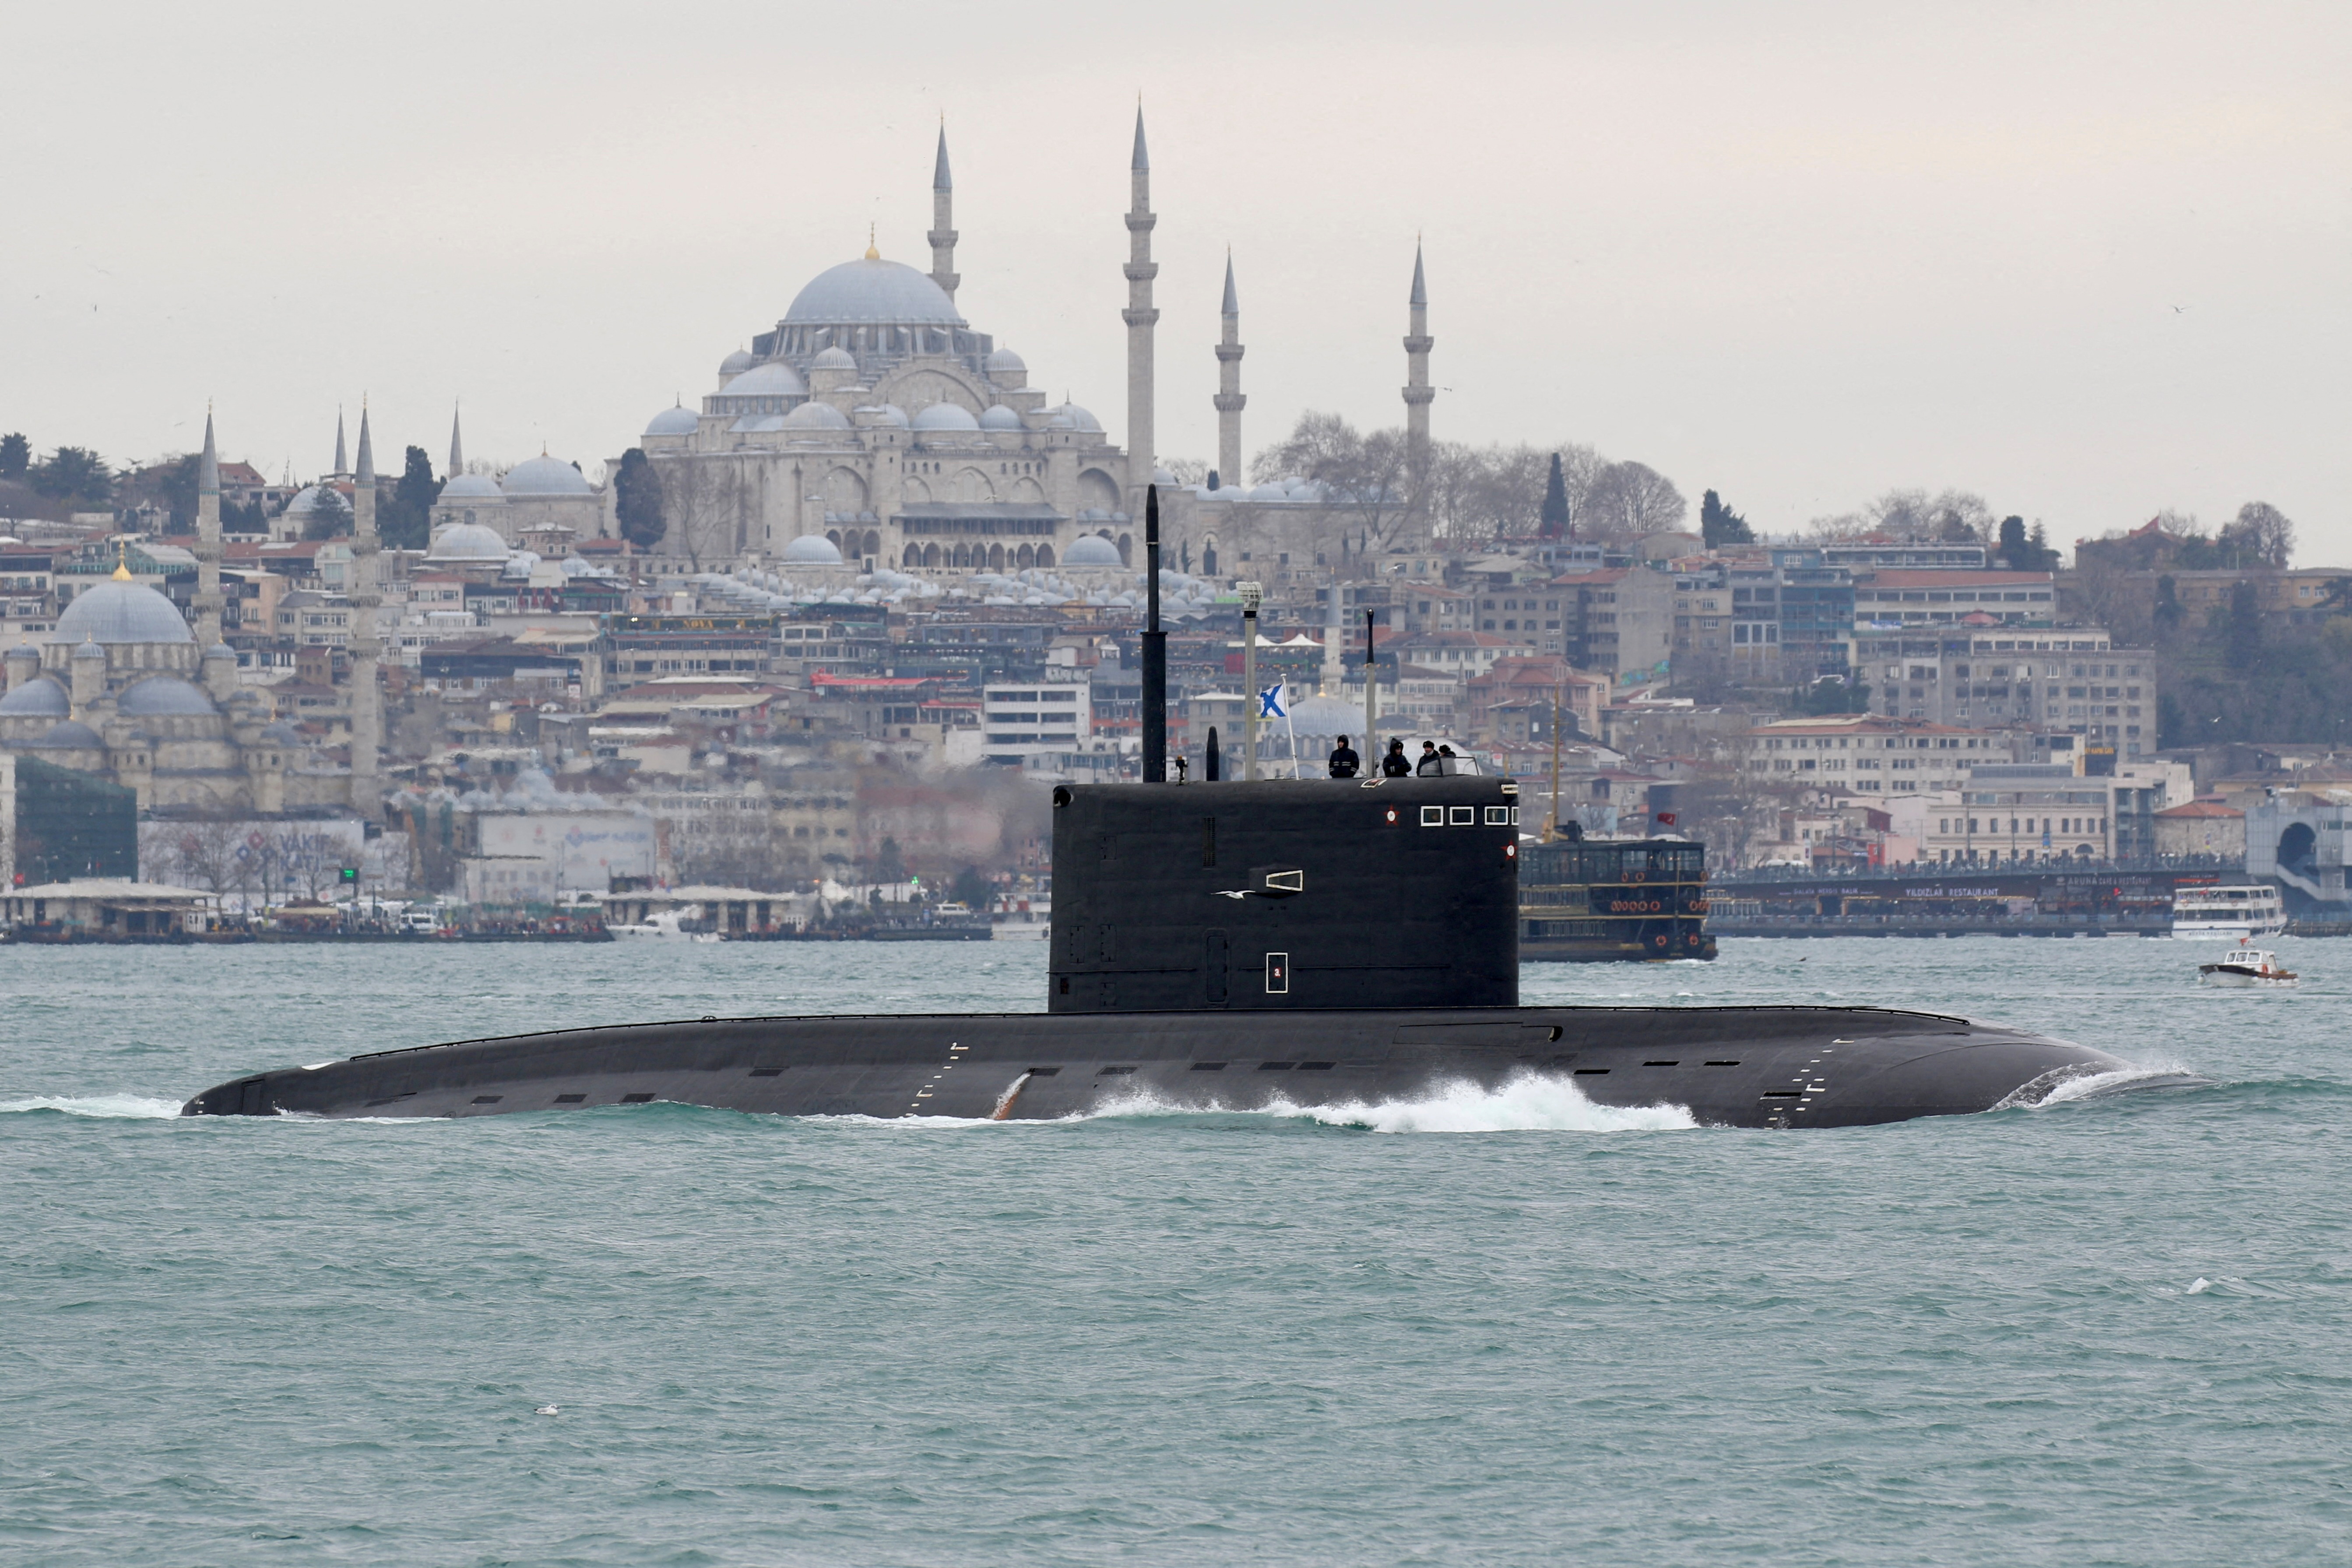 Russian Navy's diesel-electric submarine Rostov-on-Don sets sail in Istanbul's Bosphorus